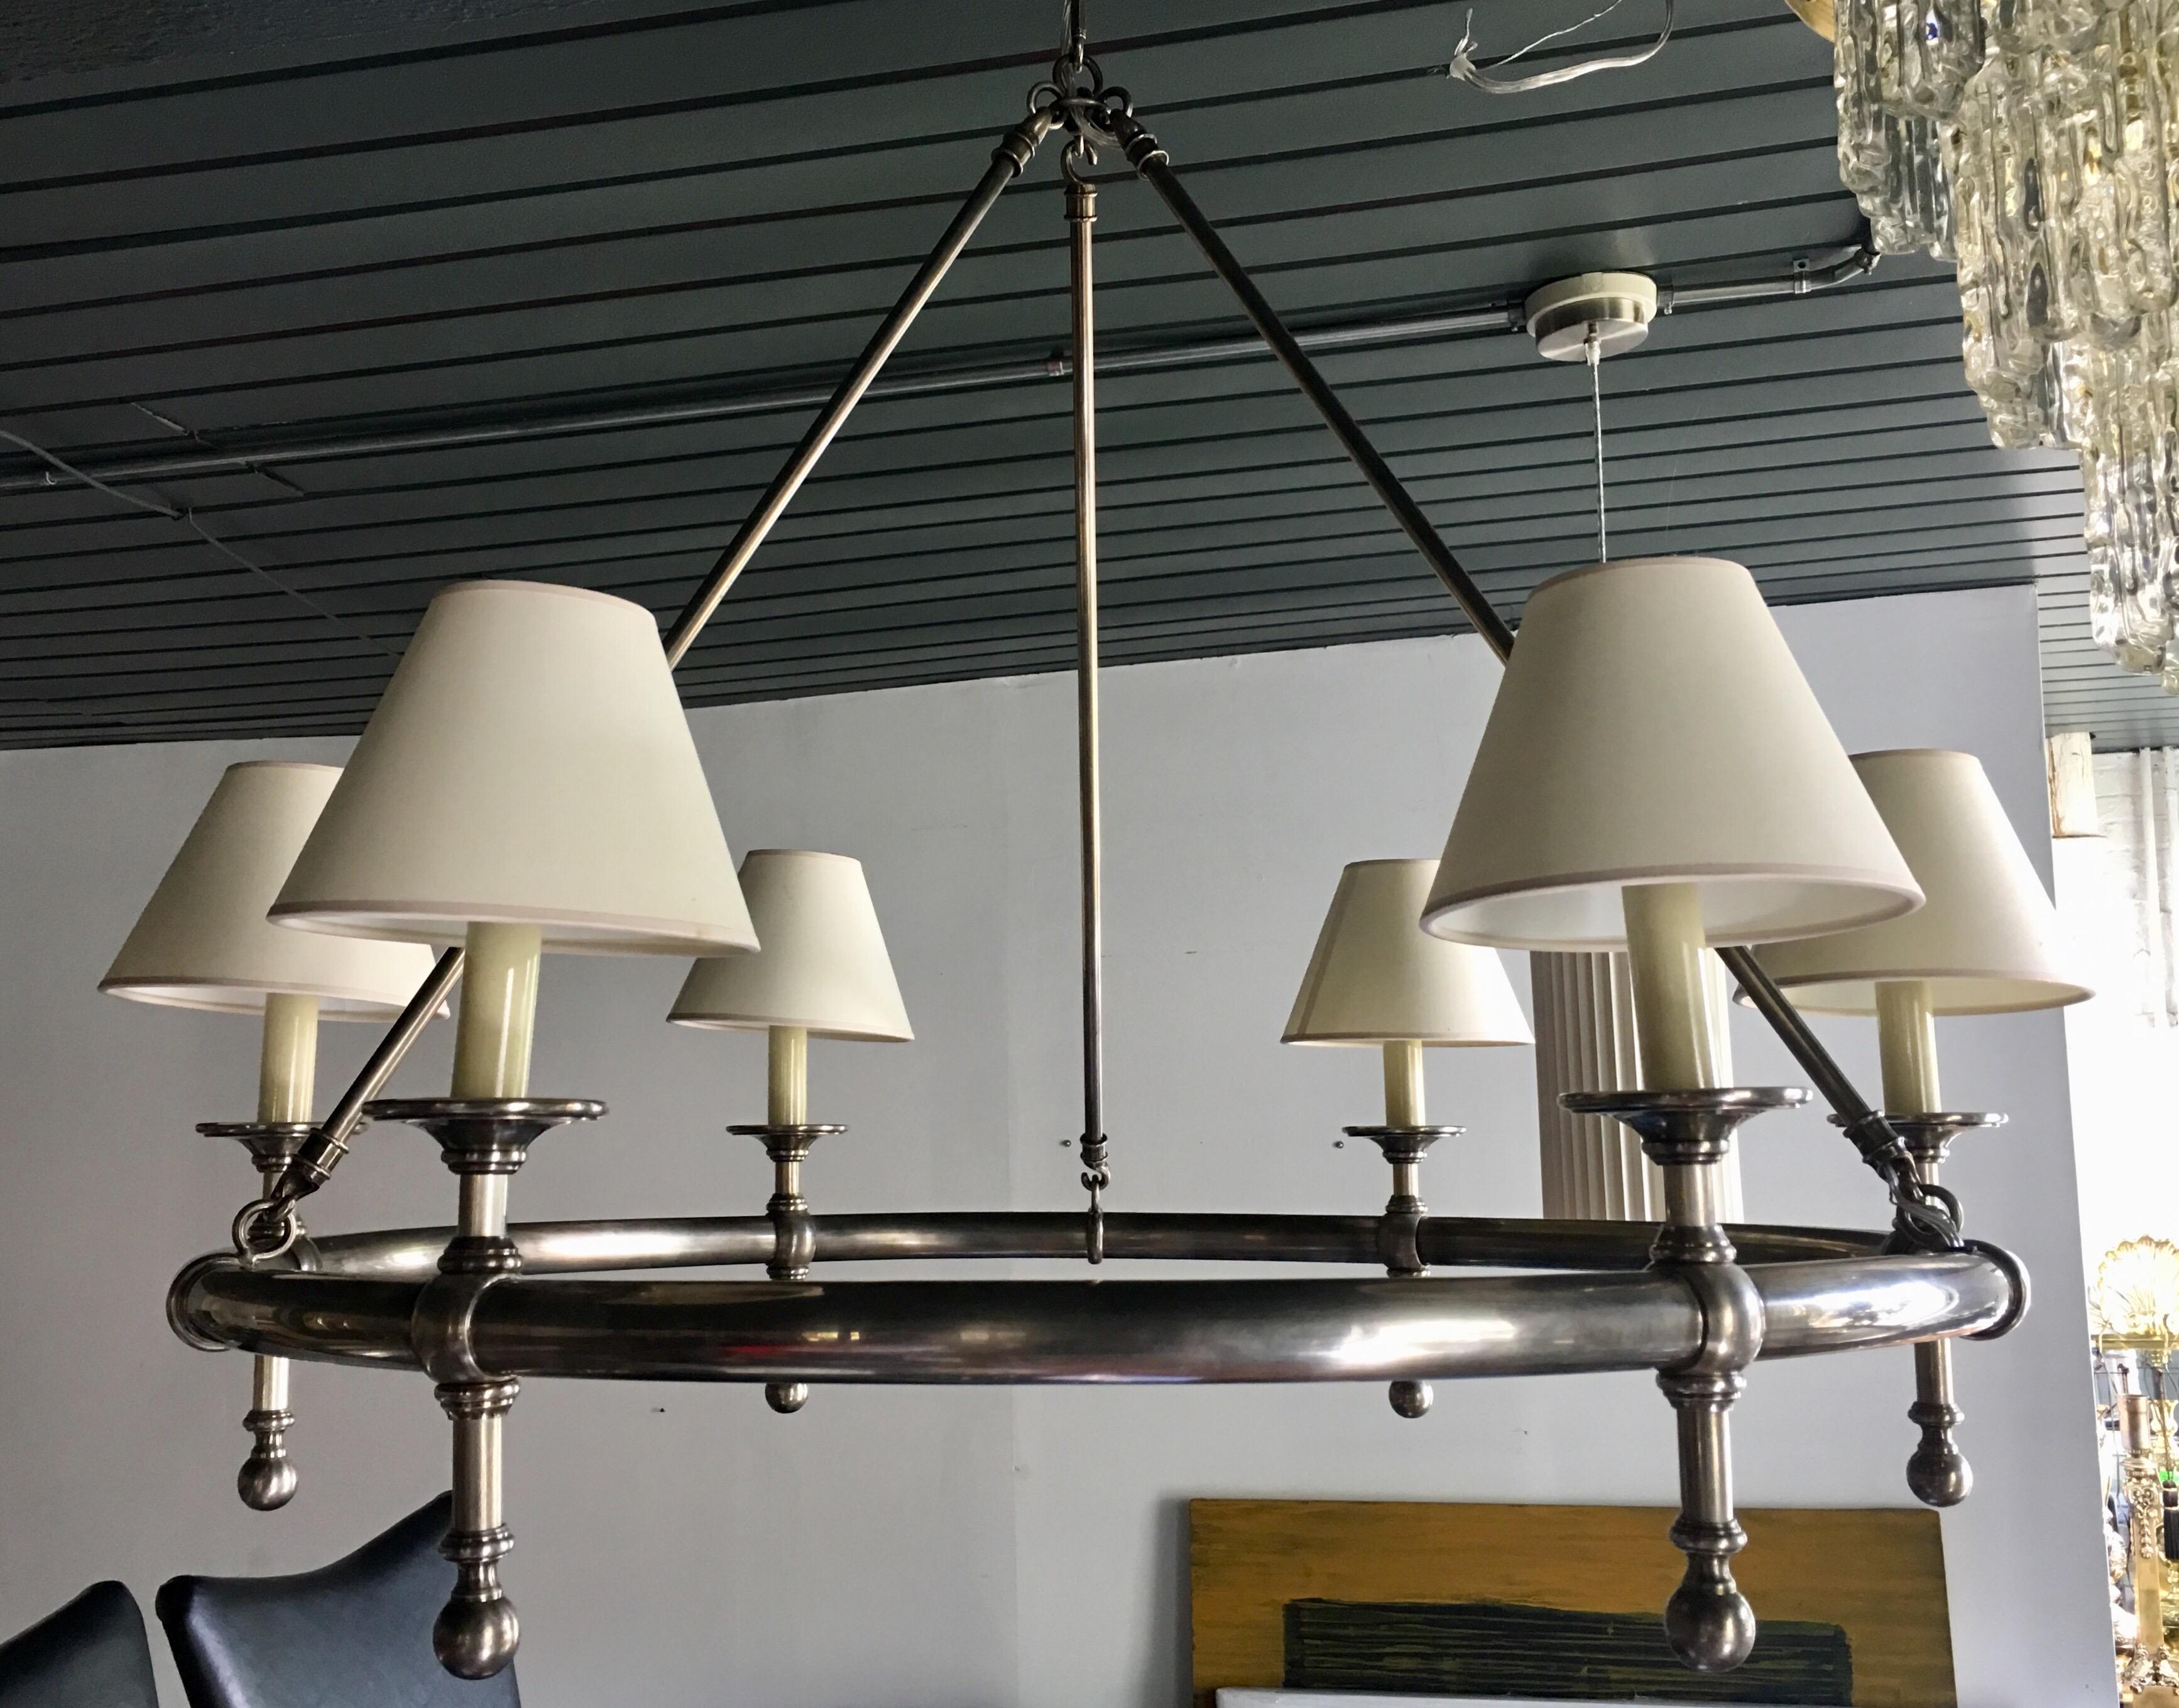 Classic antique nickel tubular ring chandelier light by Chapman. This traditional round 6-light ceiling fixture features an aged silver metal finish and cream paper shades. Candle base bulbs. 40 Watts per socket. 

Includes canopy and one chain